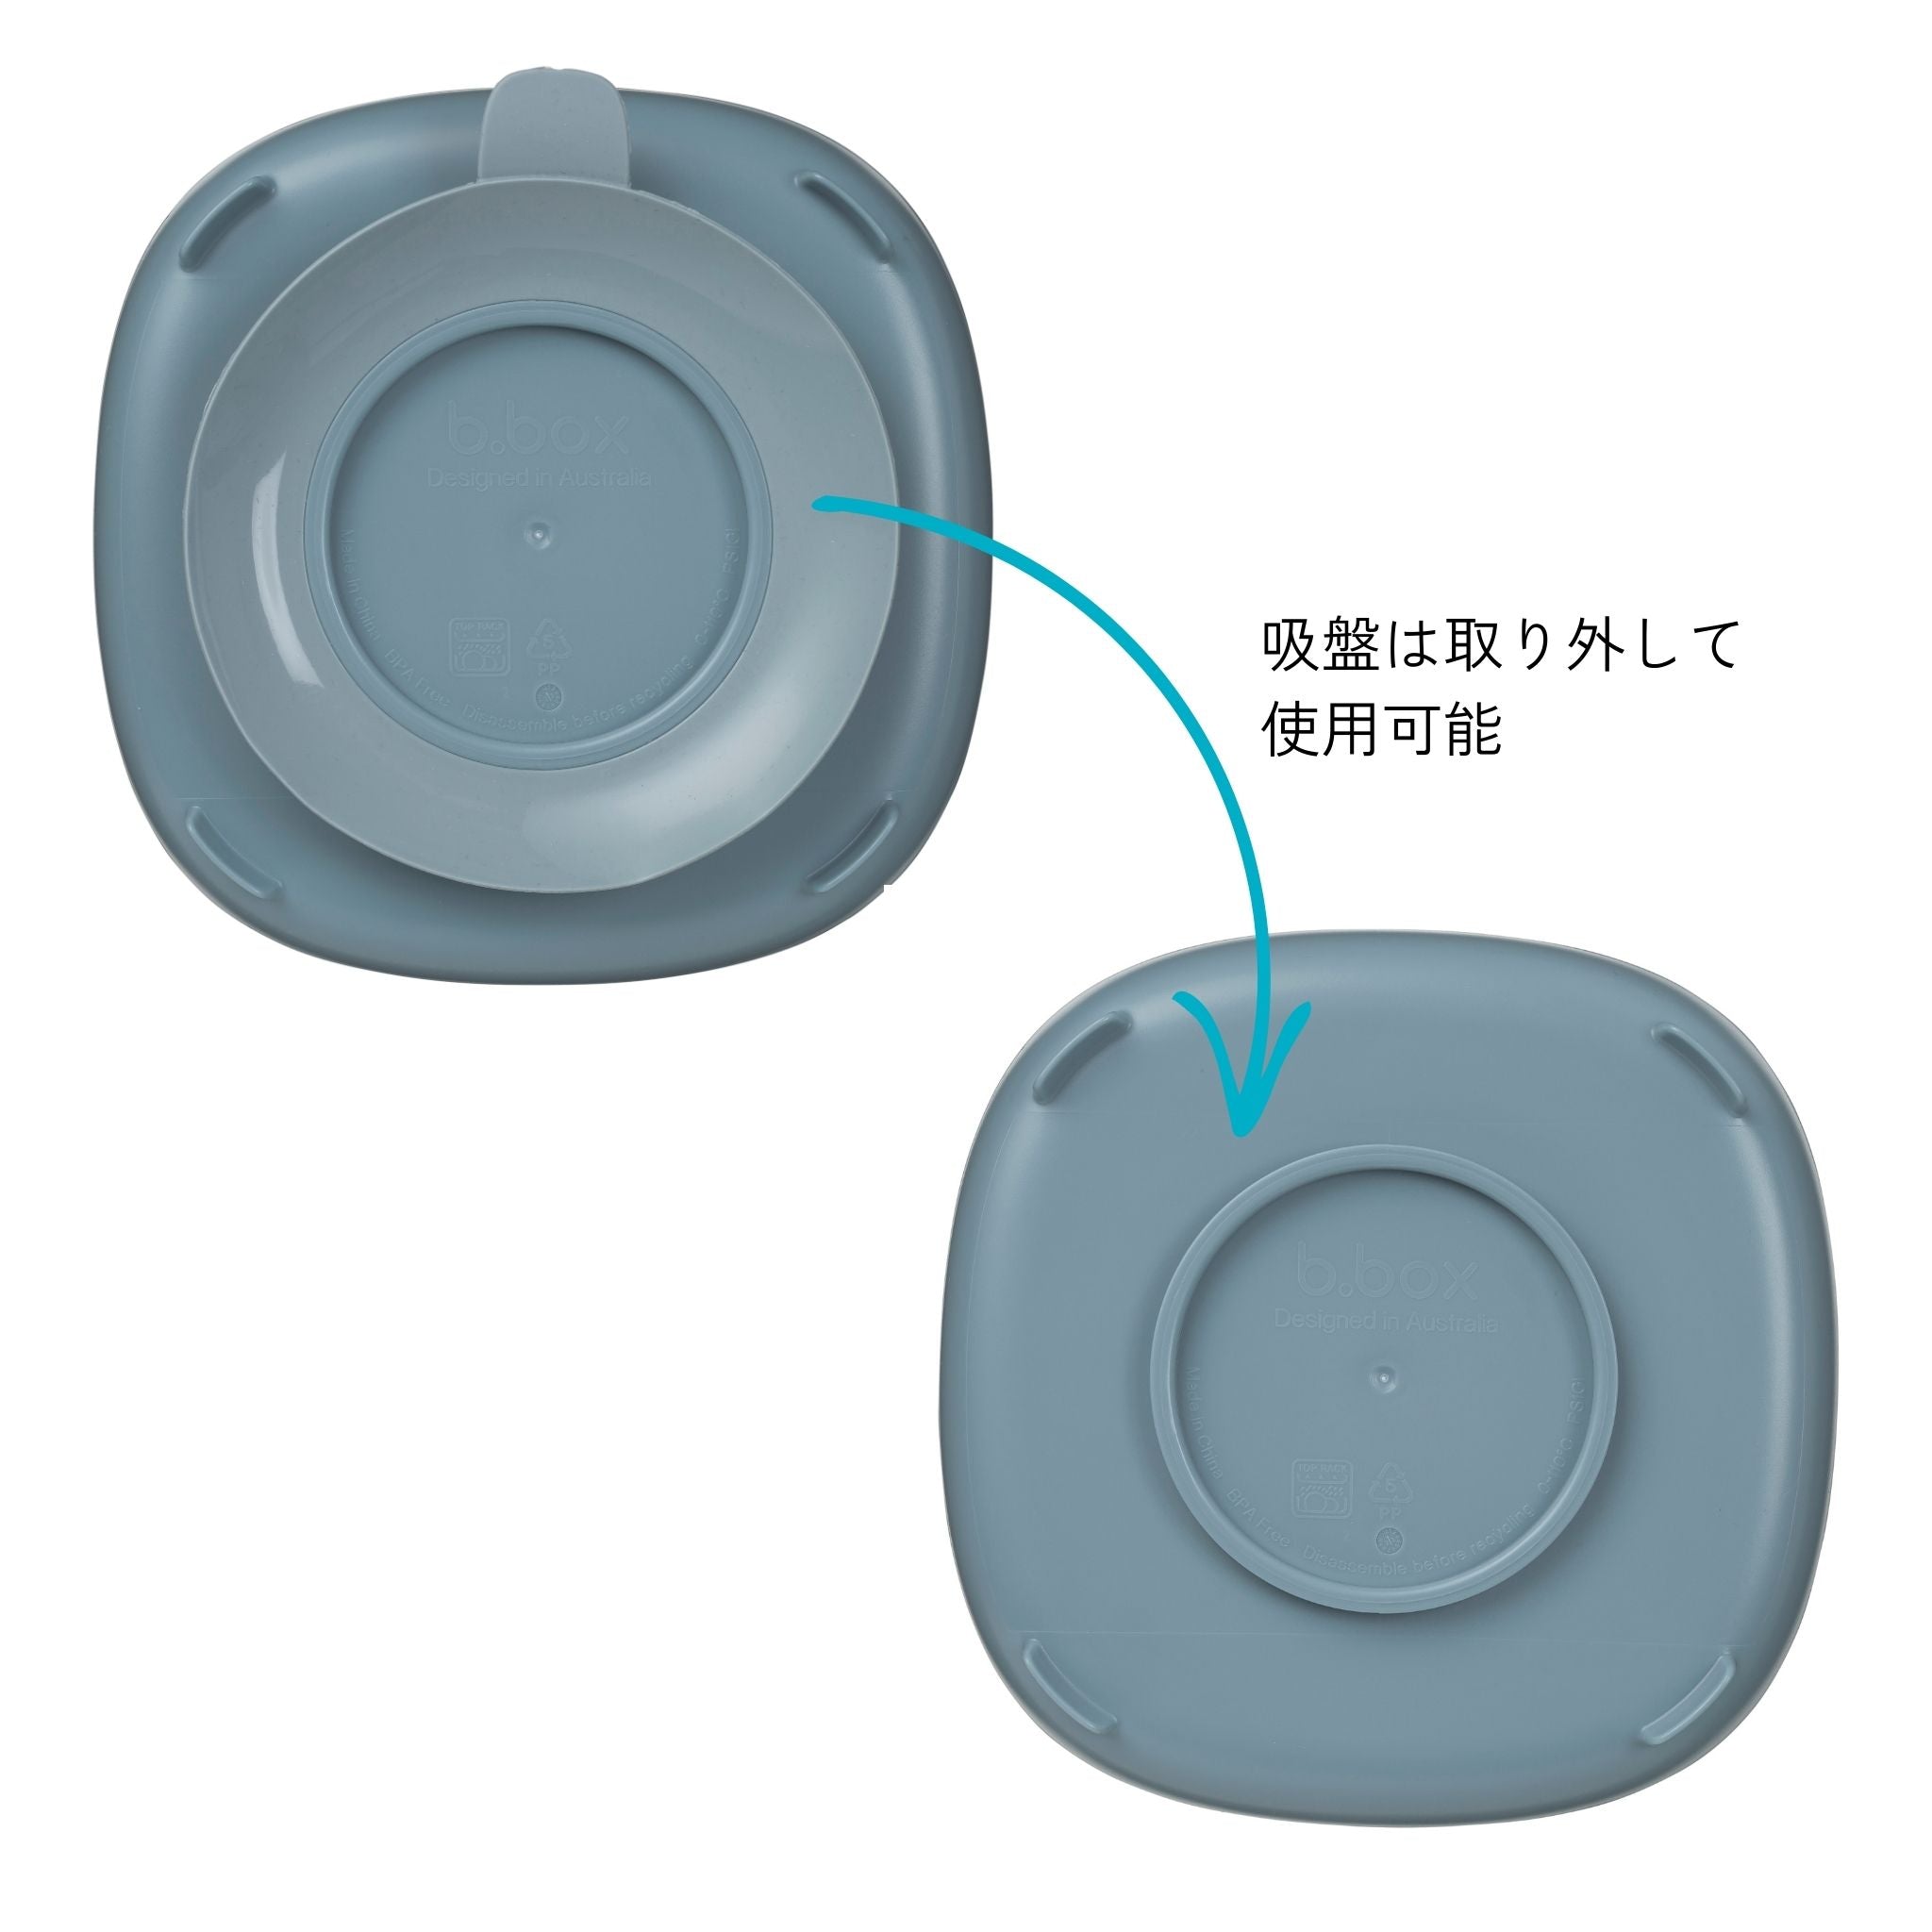 2 in 1 suction plate ocean 吸盤取り外しOK